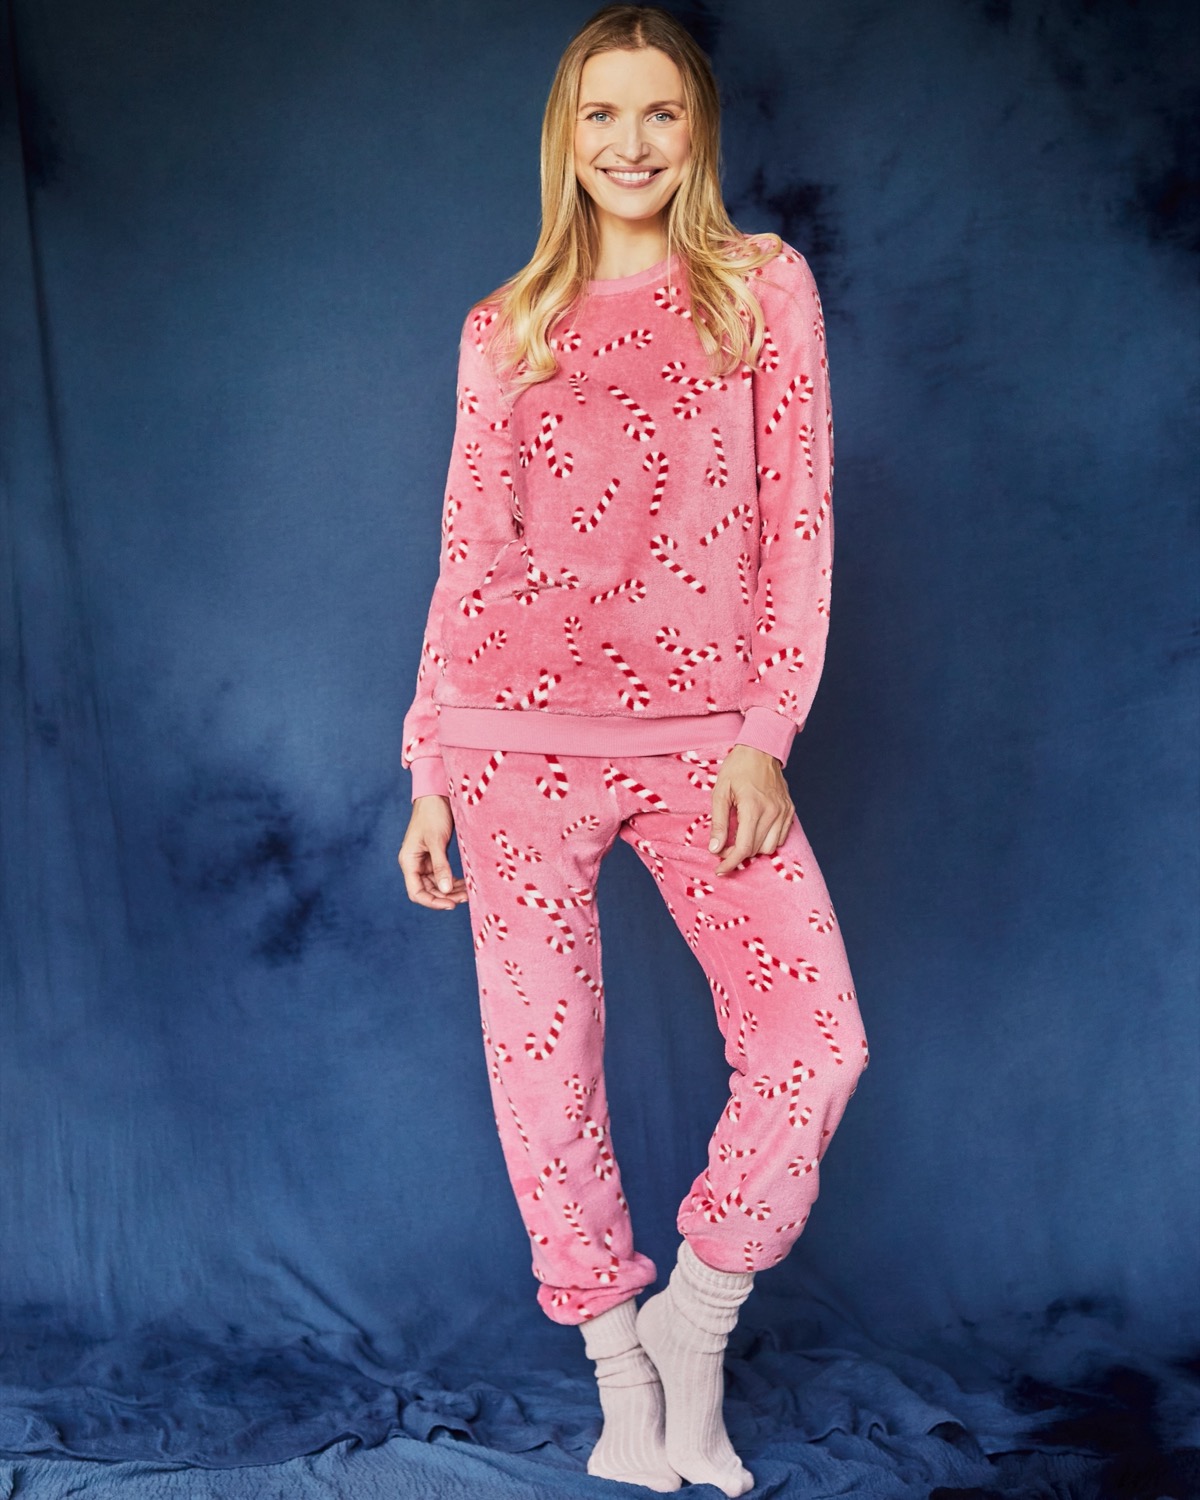 https://dunnes.btxmedia.com/pws/client/images/catalogue/products/1641985/zoom/1641985_pink.jpg